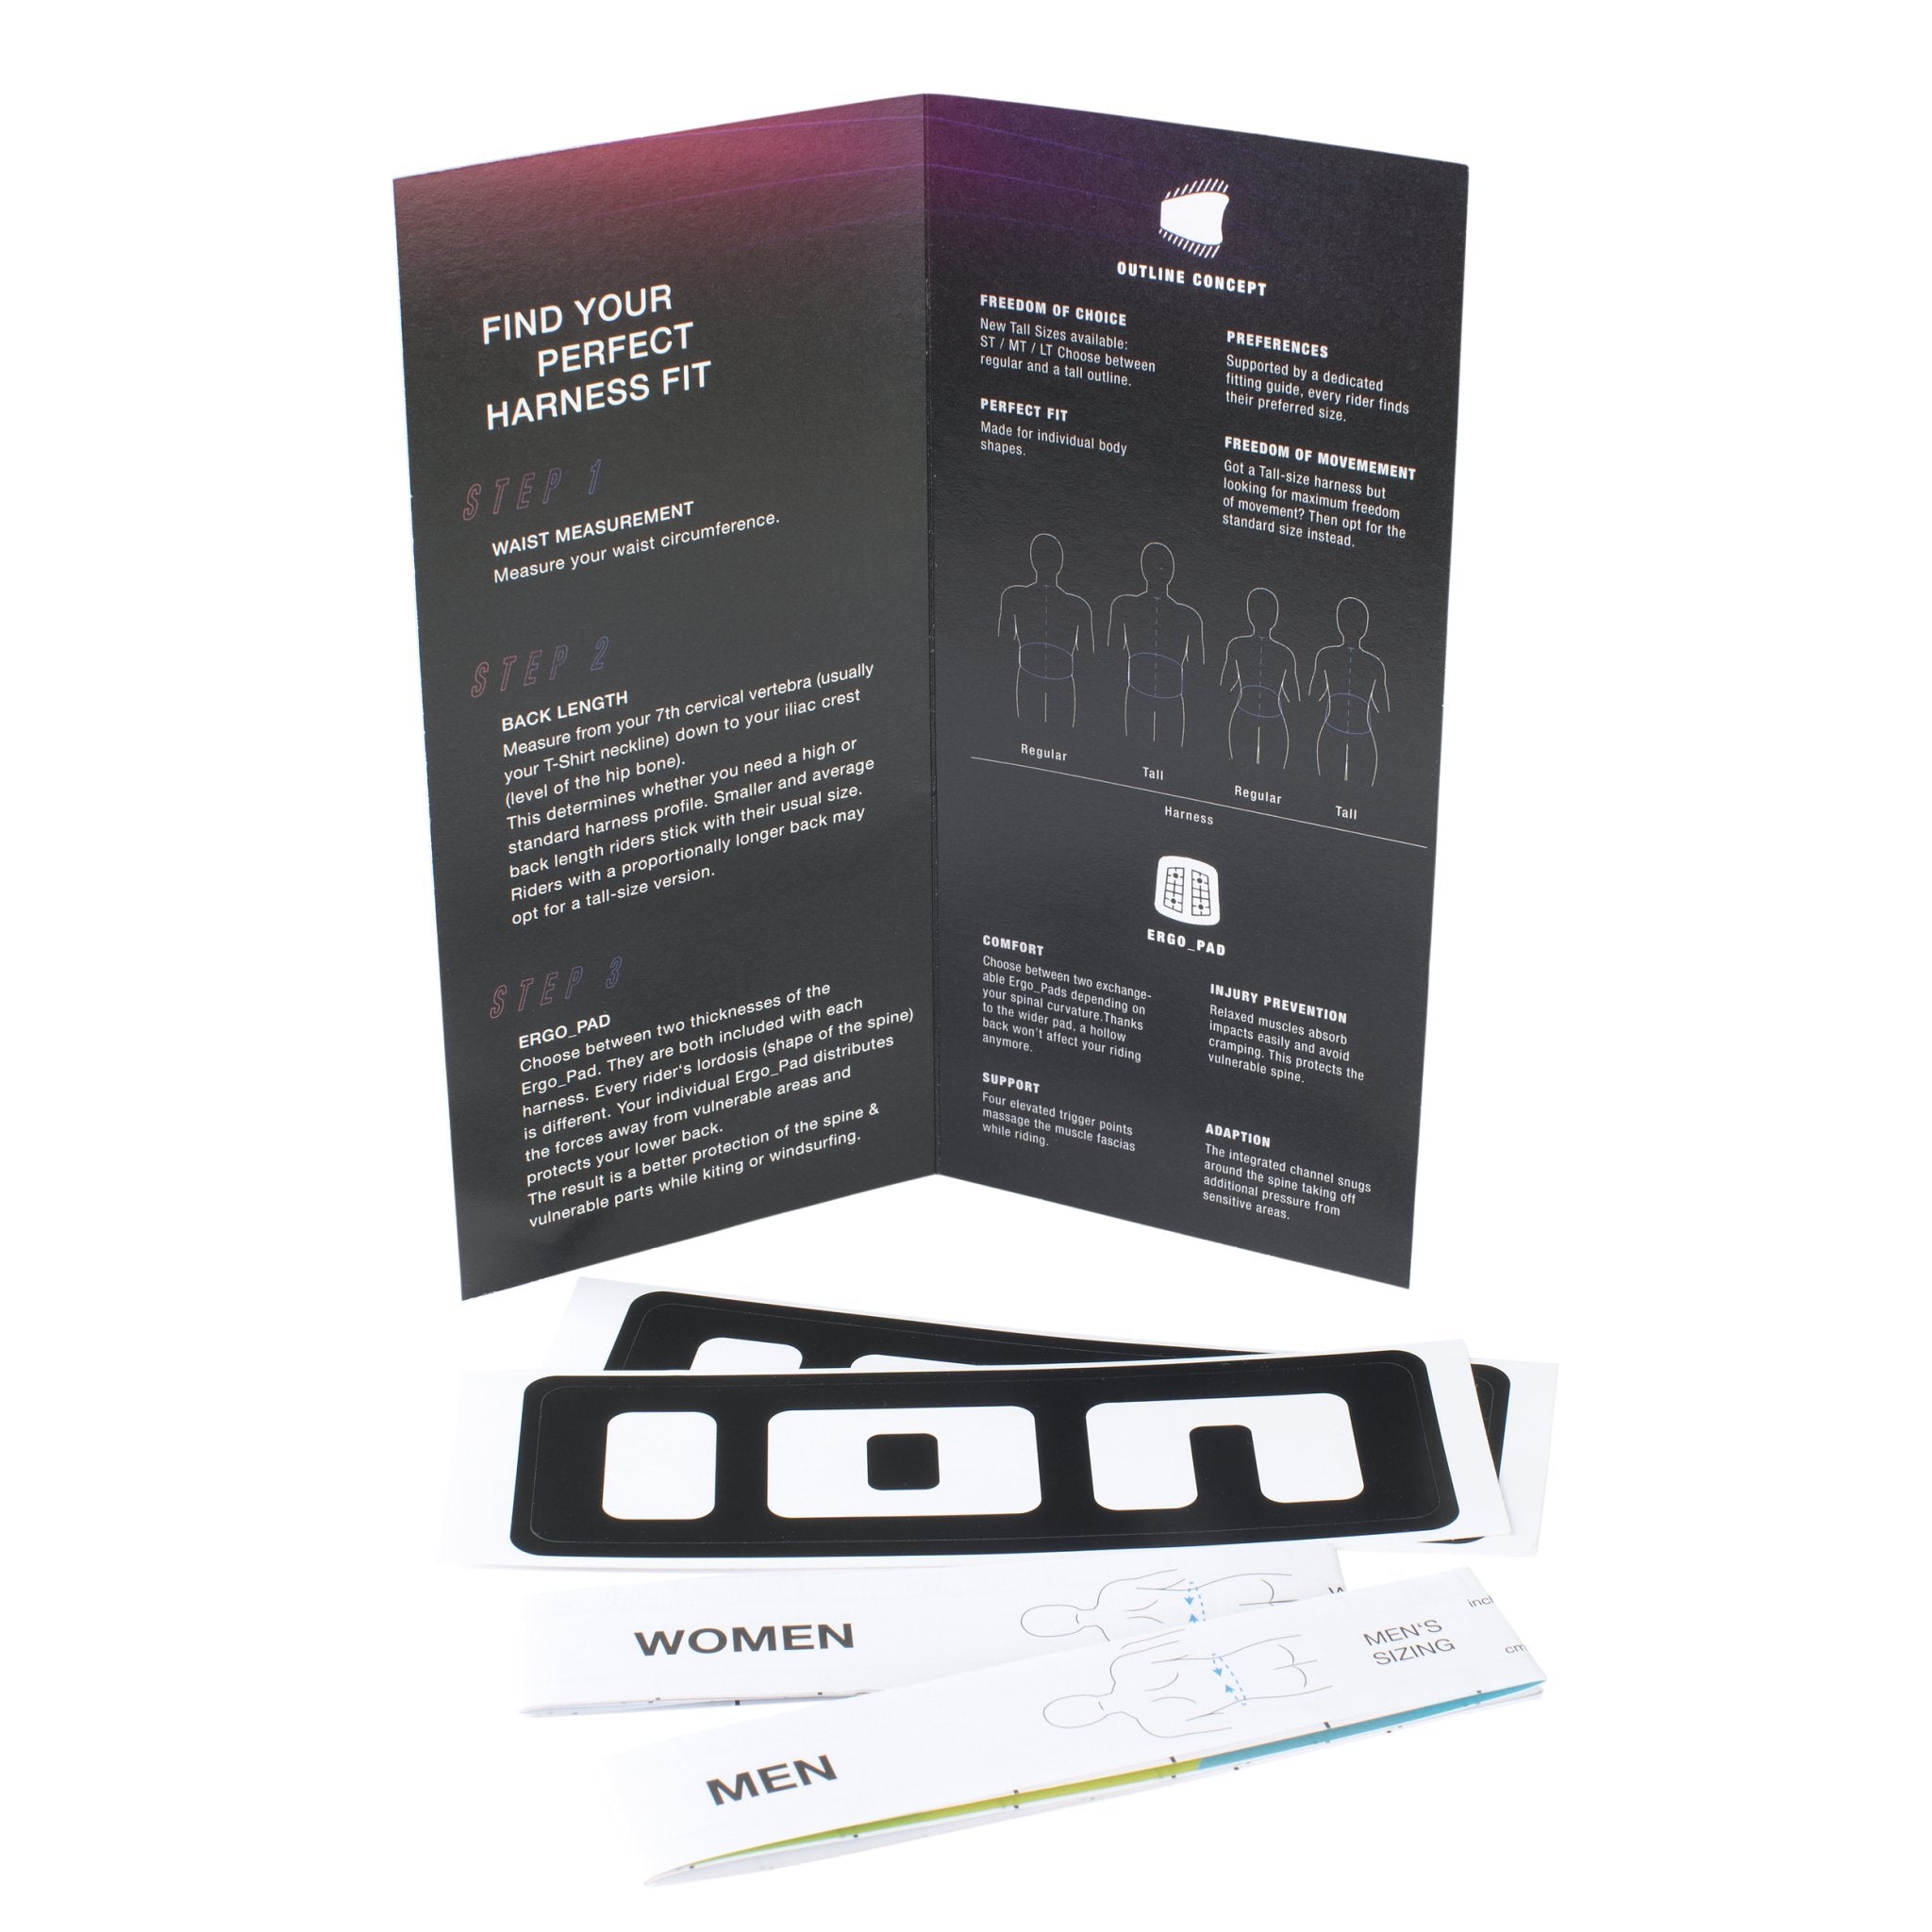 ION Kiteboarding and Windsurf Harness MEASUREMENT set tool - Worthing Watersports - 9010583131207 - Harness - ION Water